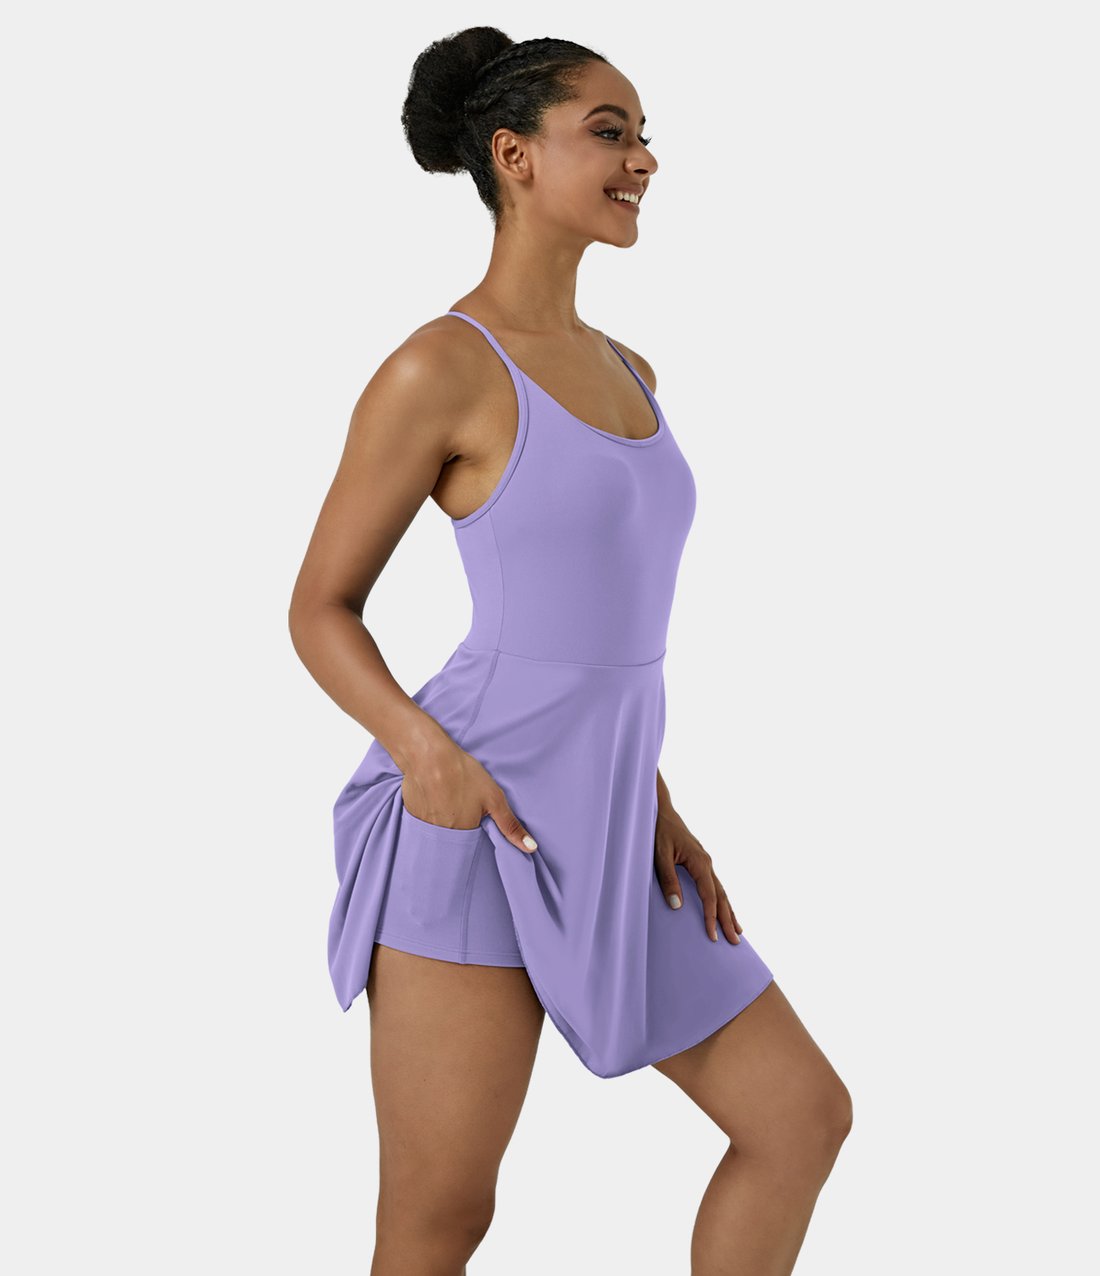 NKOOGH Tummy Control Dress for Women Casual Short Dress for Women Women  Workout Tennis Dress With Built In Bra Shorts Shoulder Straps And Pockets -  Walmart.com